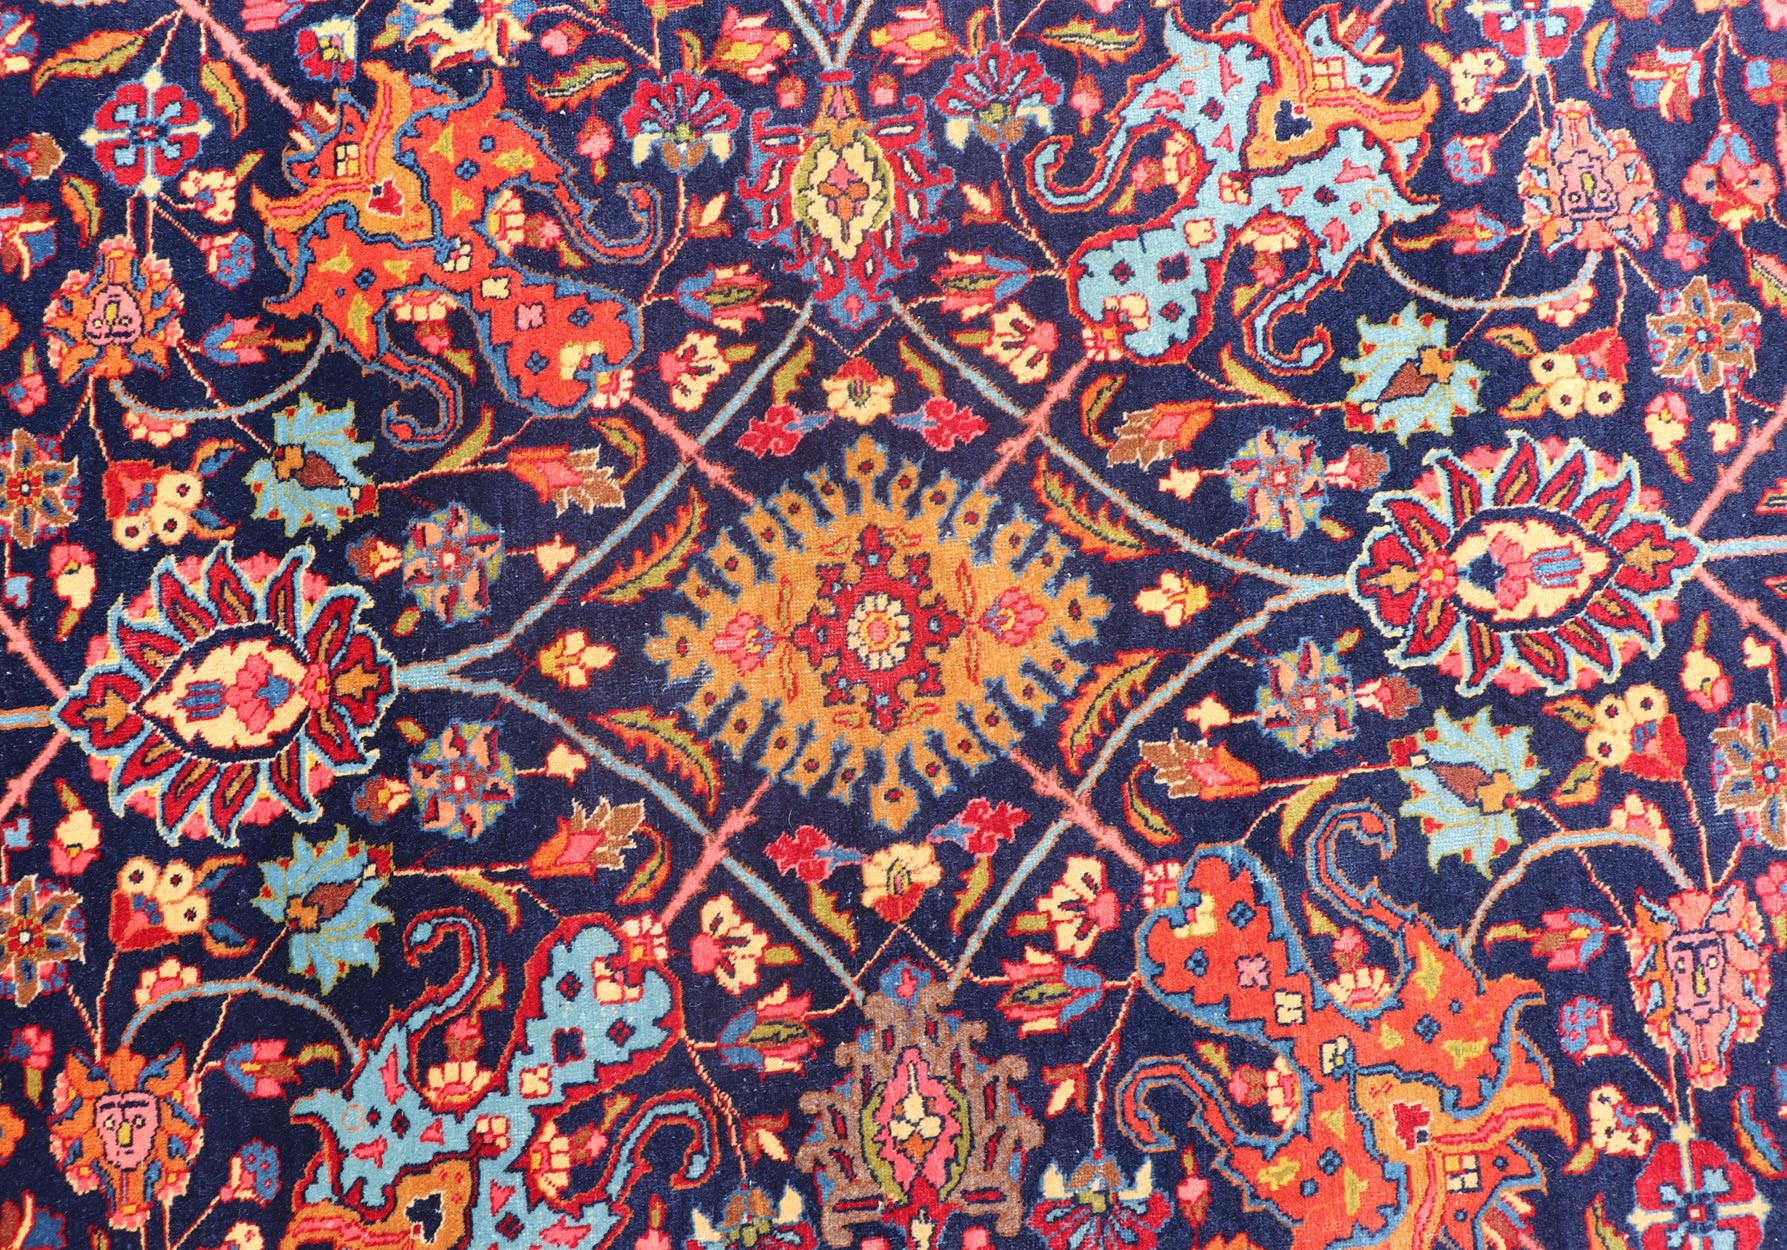 Large Antique Persian Tabriz rug with All-Over Sub-Geometric and Colorful Design. Country of Origin: Iran; Type: Tabriz; Design: Floral, Sub-Geometric Floral, All-Over; Keivan Woven Arts: rug PTA-200729; Large Hand-Knotted Antique Persian Tabriz Rug